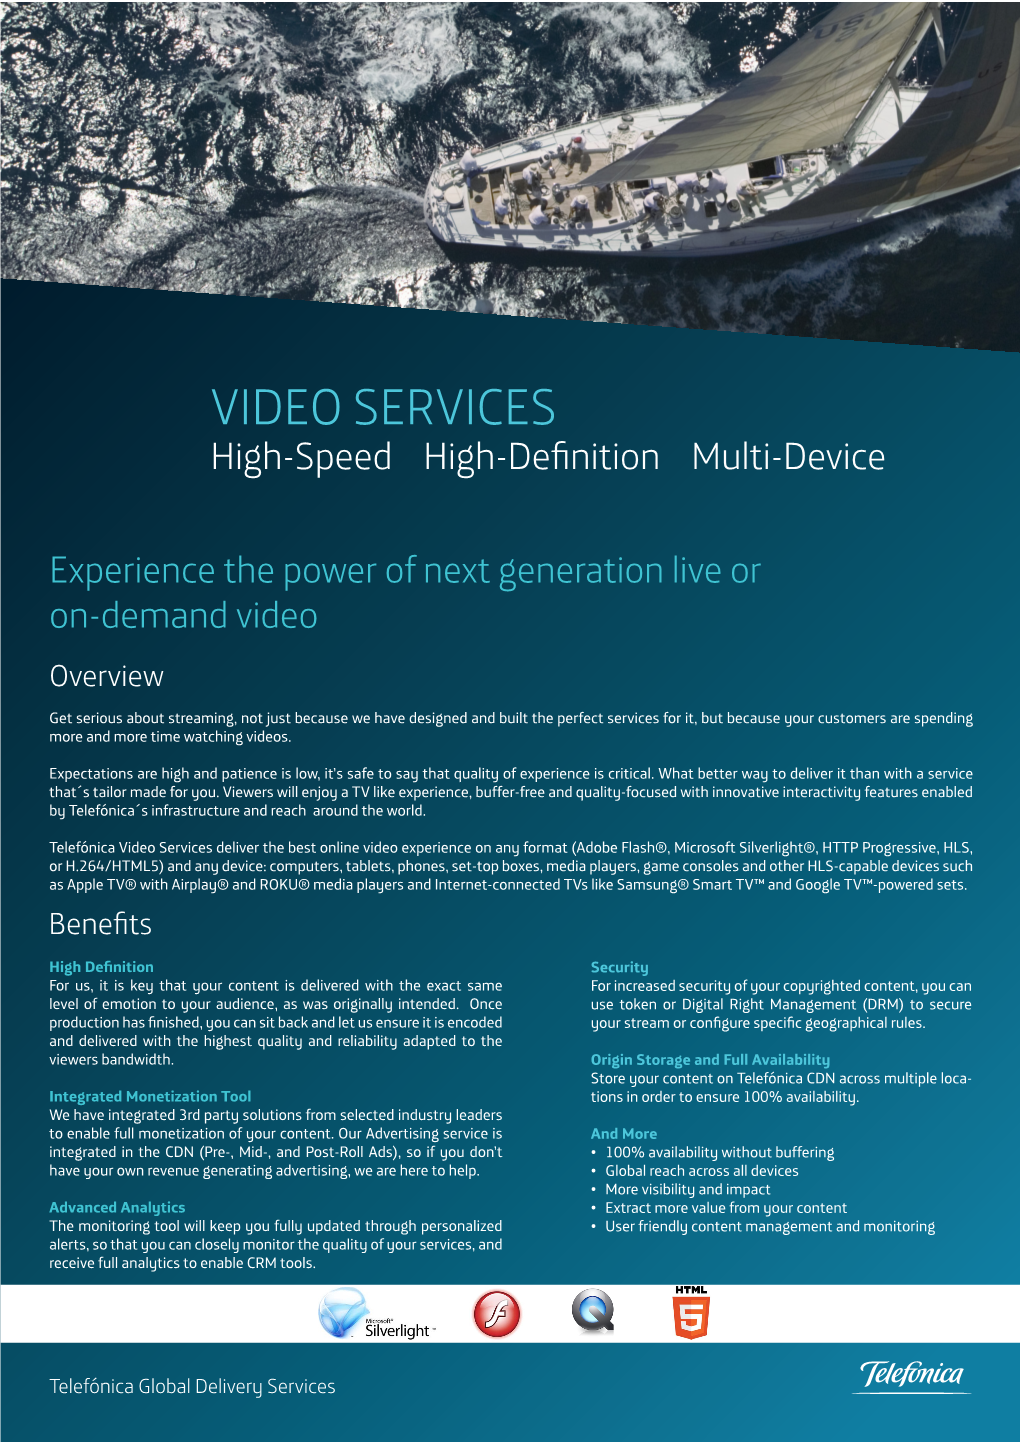 VIDEO SERVICES High-Speed High-Deﬁnition Multi-Device